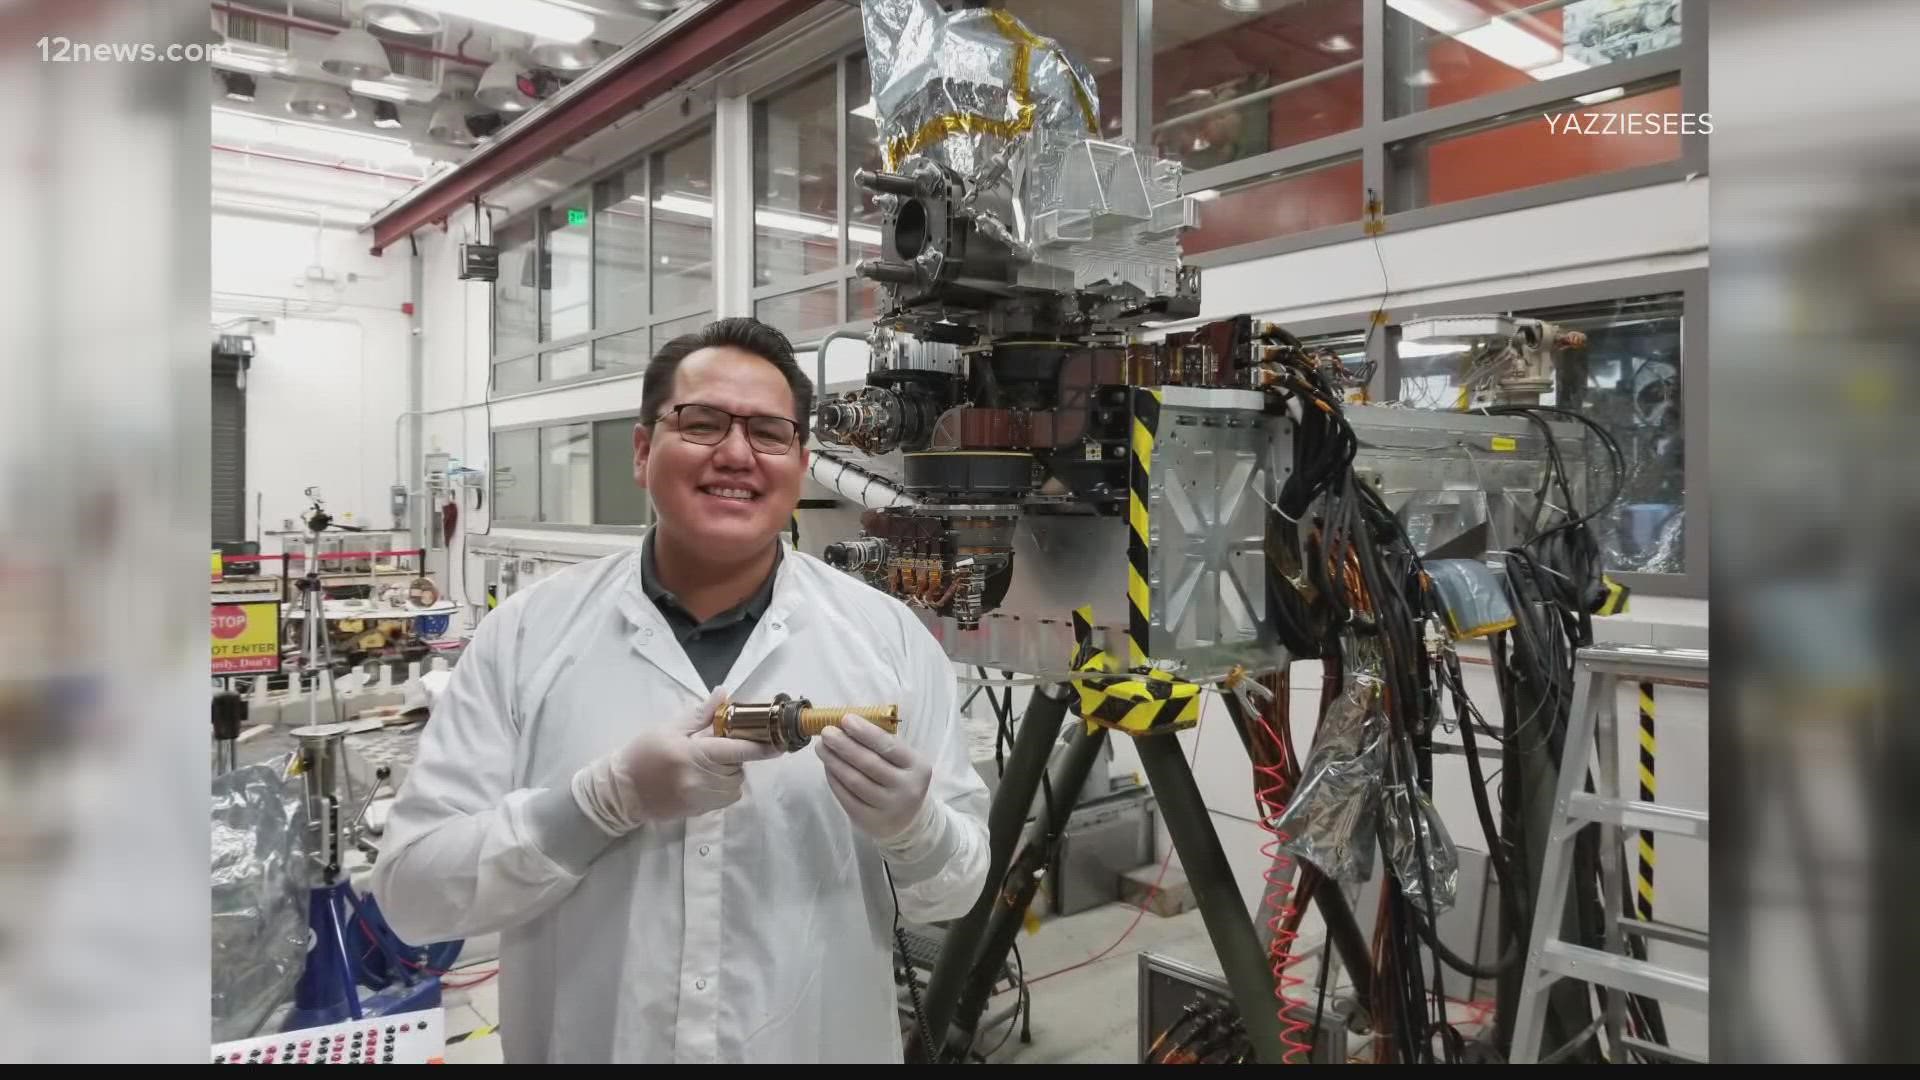 Aaron Yazzie is navigating Mars missions like Curiosity, Insight and the most recent, Perseverance, which landed on the red planet back in February.